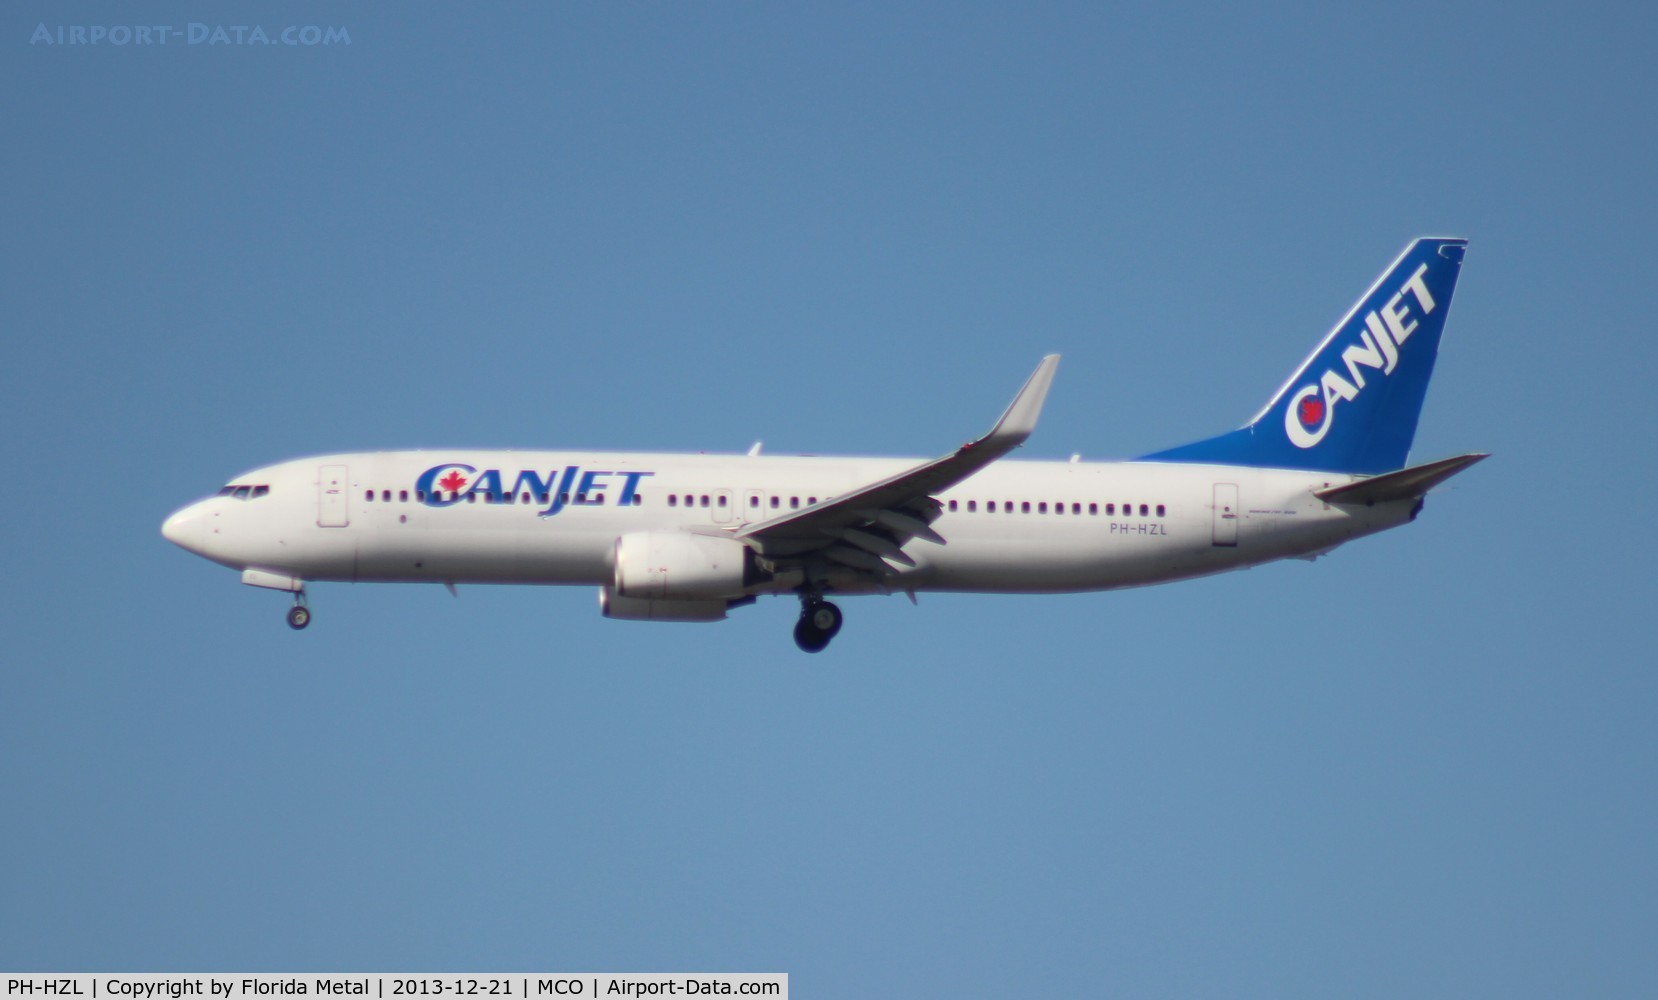 PH-HZL, 2001 Boeing 737-8K2 C/N 30391, Canjet with aircraft on lease from Transavia Netherlands